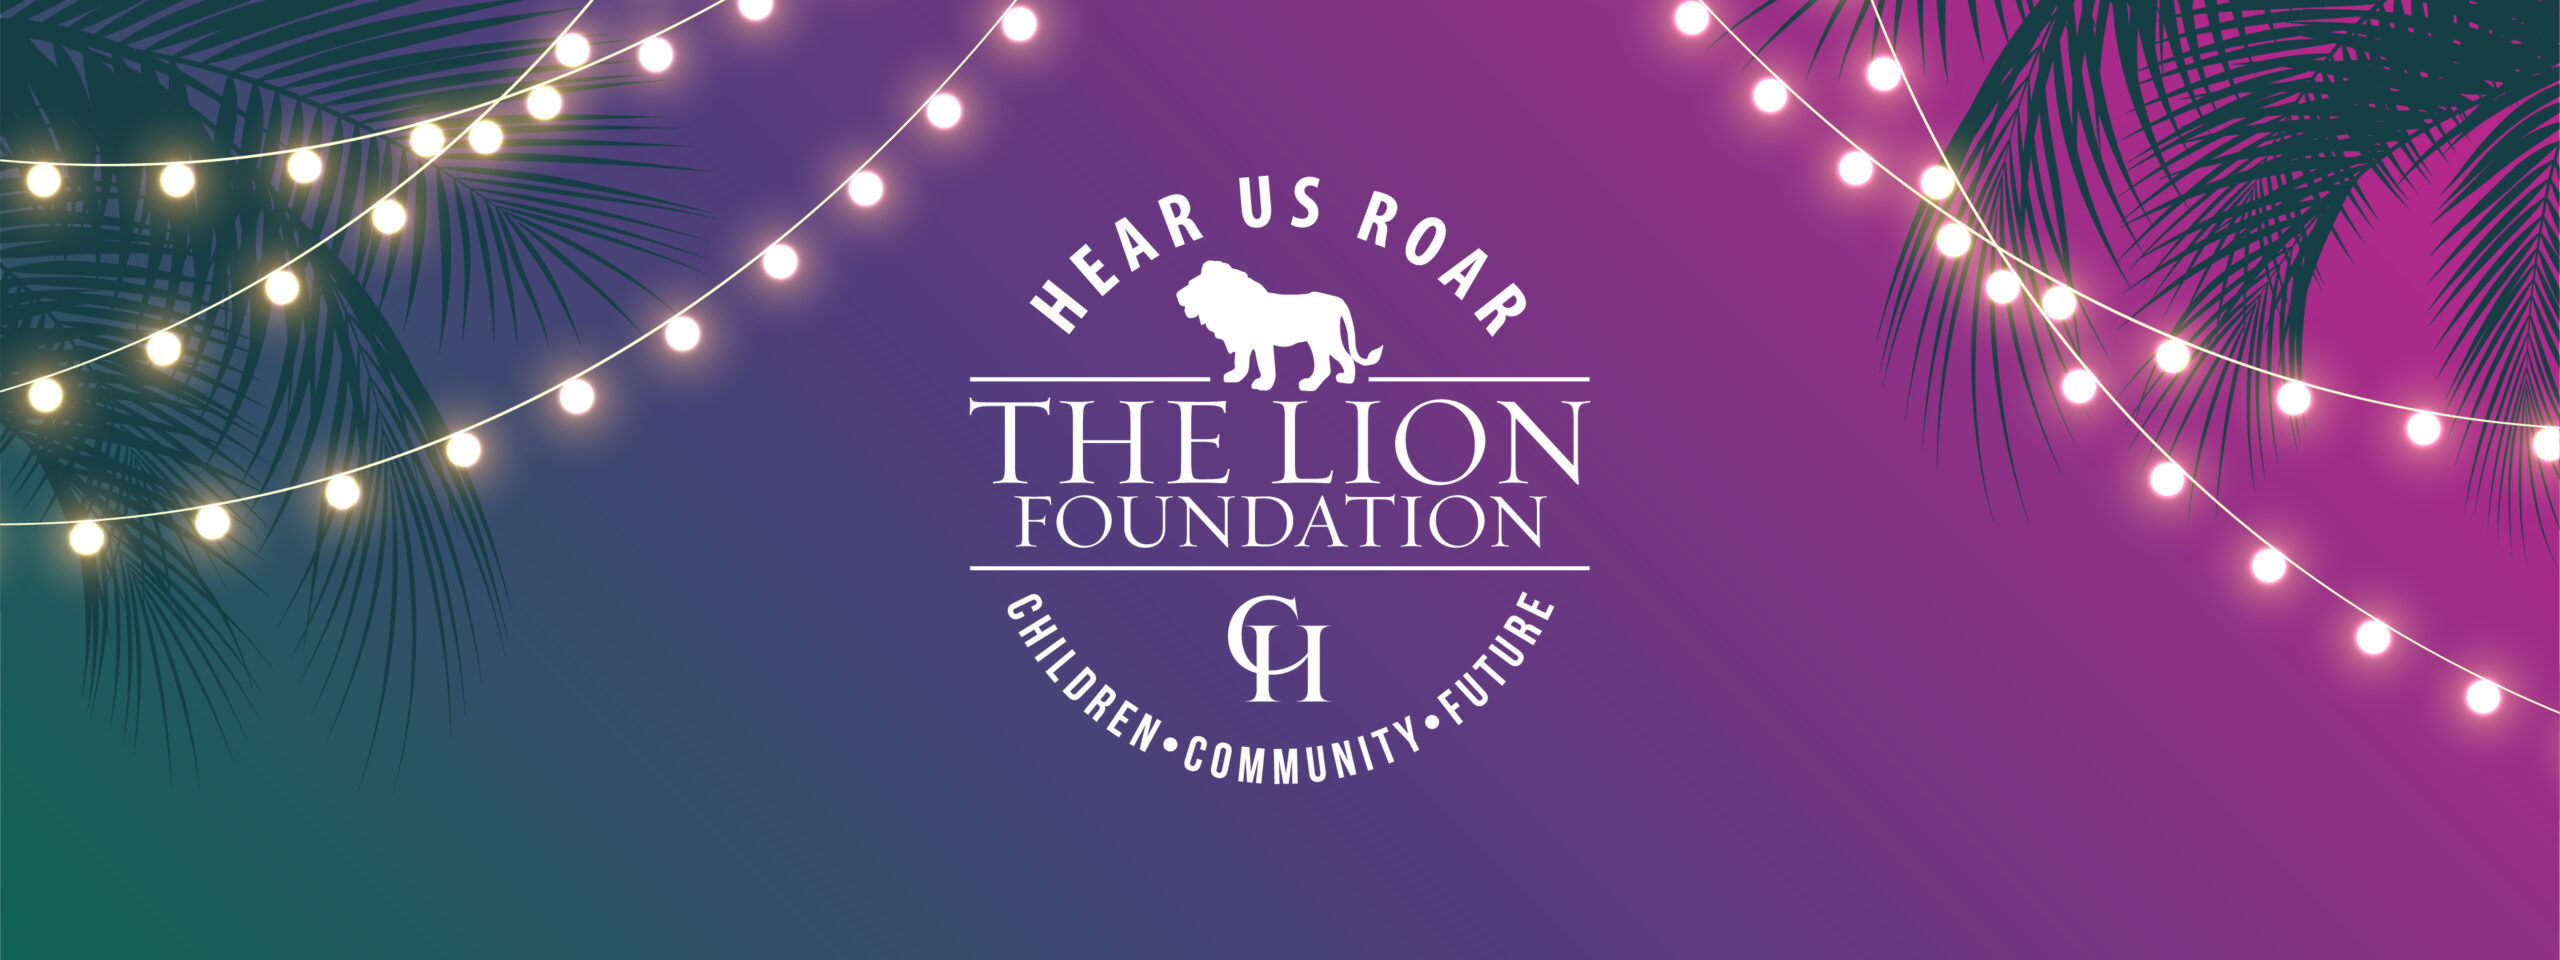 Cross Creative is excited to be a proud sponsor of the Lion Foundation